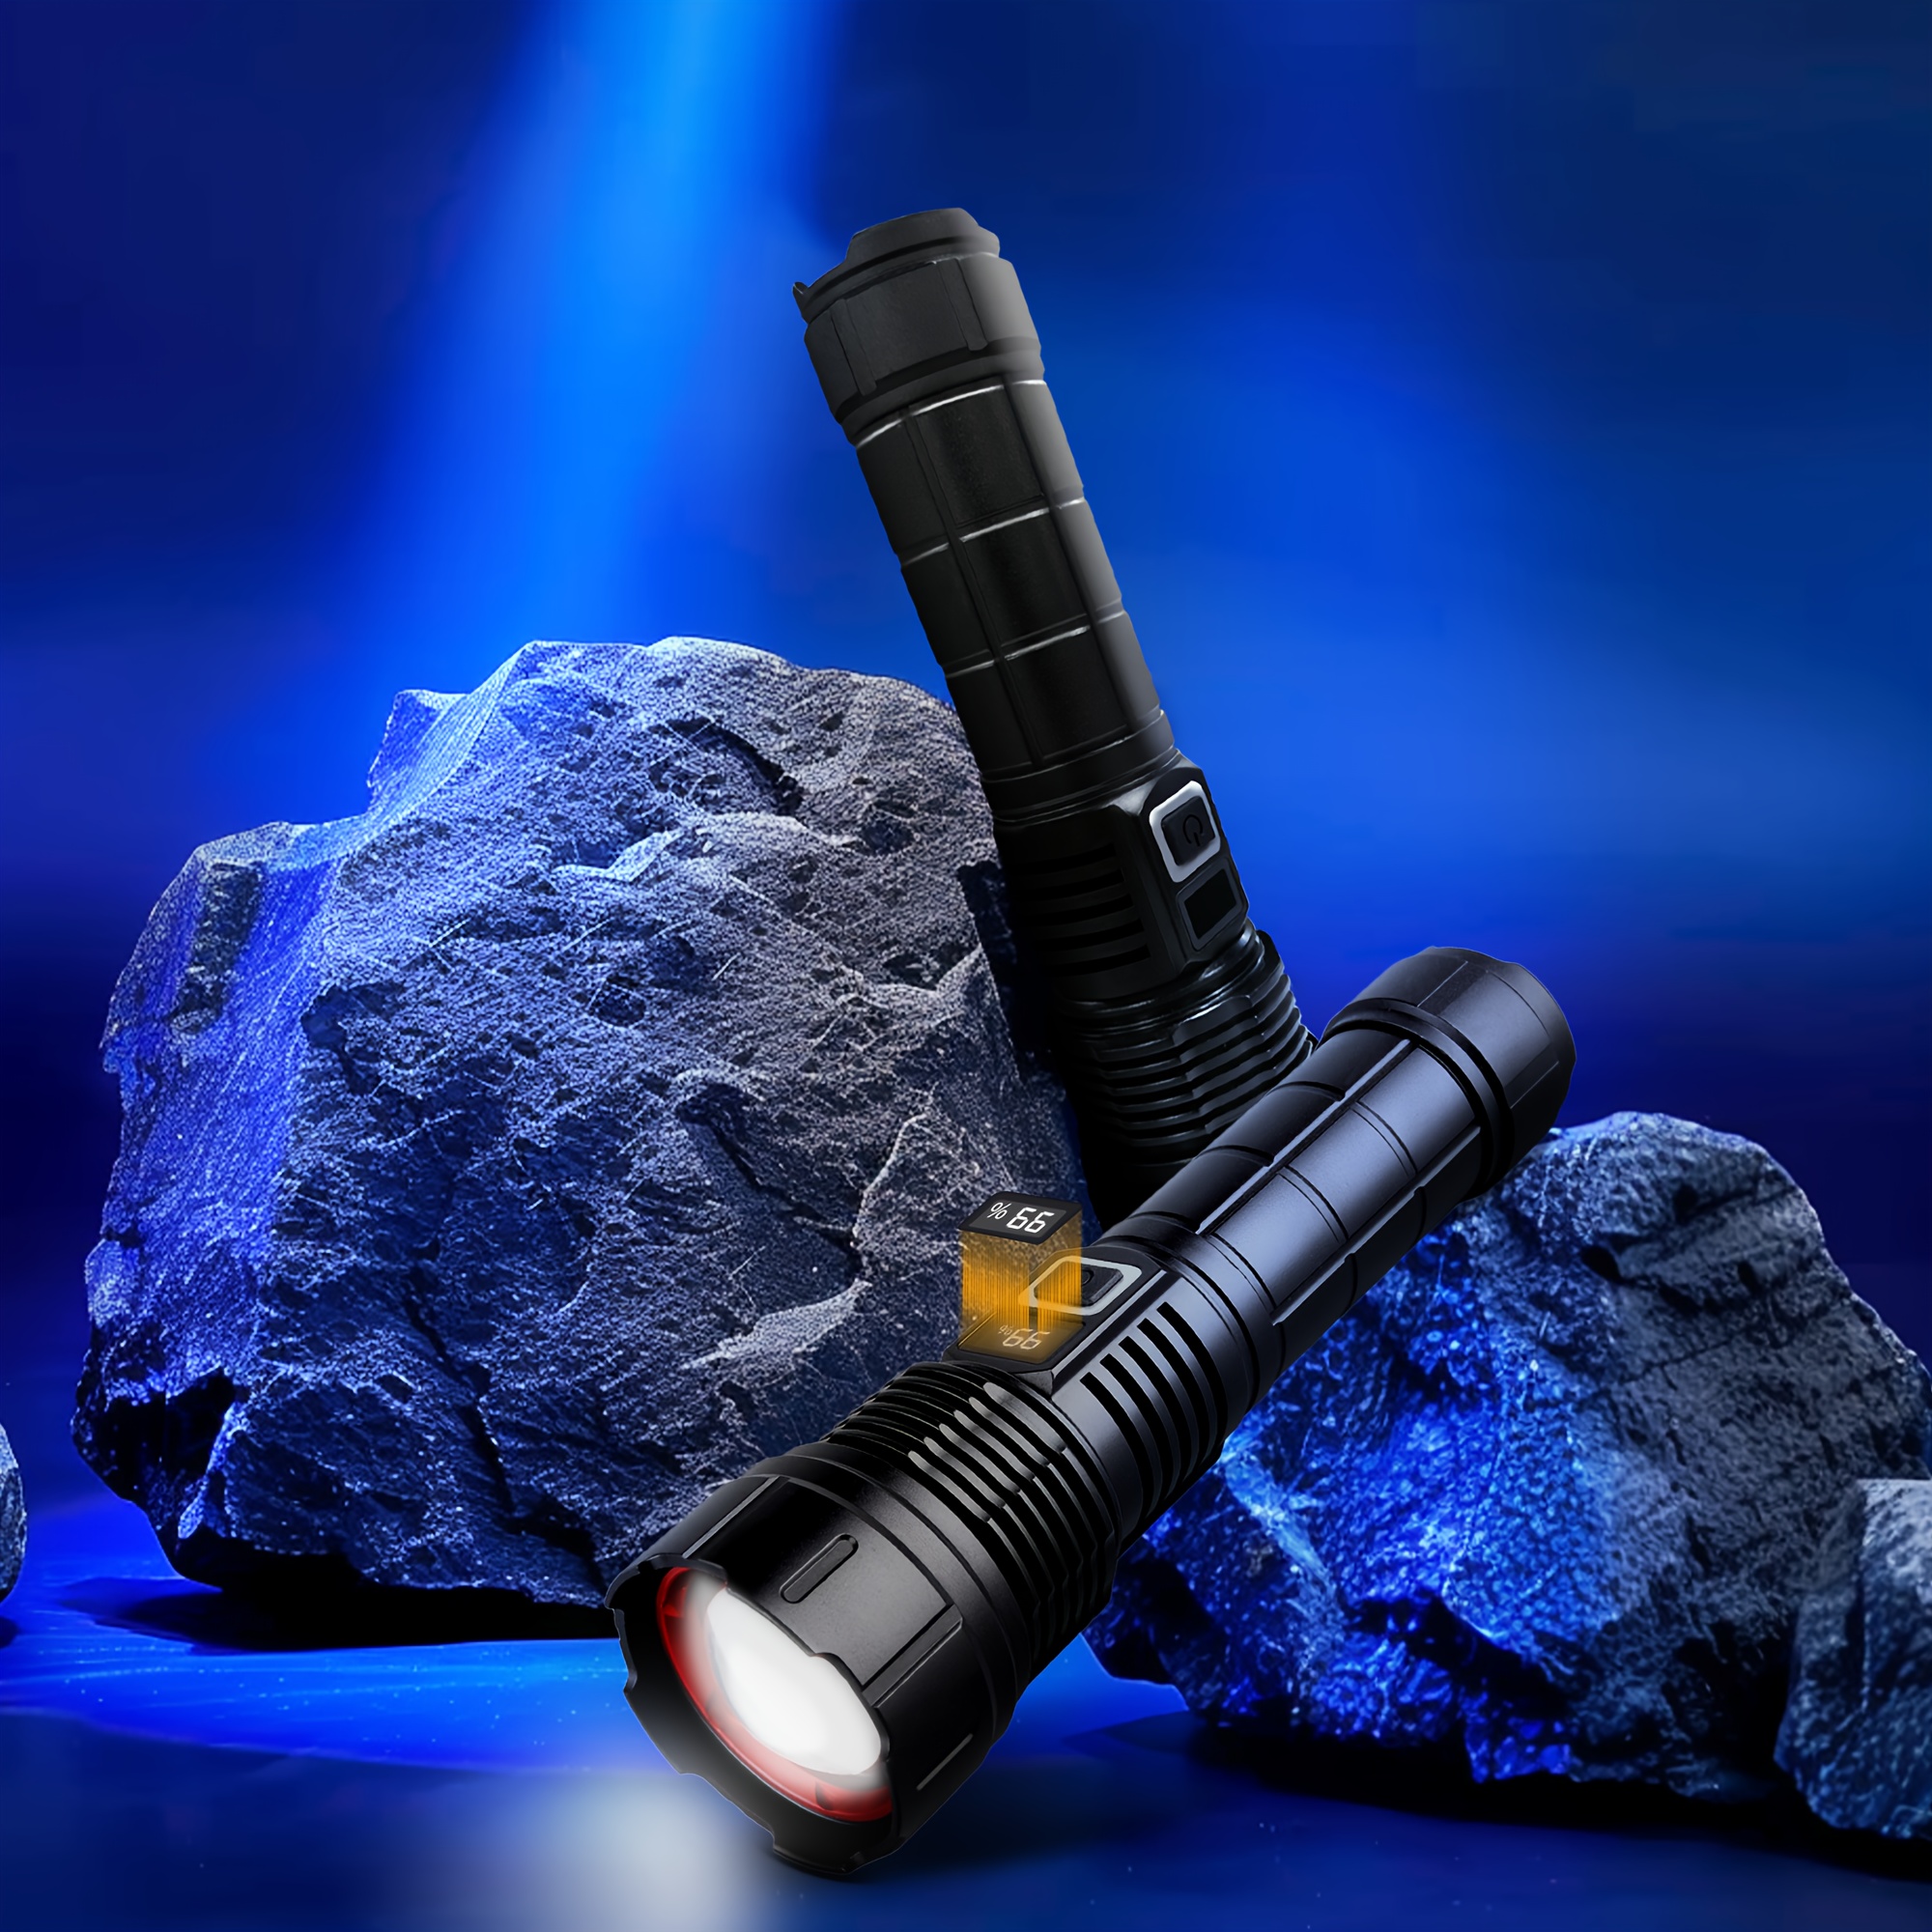 

Led Flashlights, High Powered Super Bright Tactical Flashlight, Rechargeable, Zoomable Waterproof Flash Lights For Emergency, Outdoor, Home, Camping, Hiking